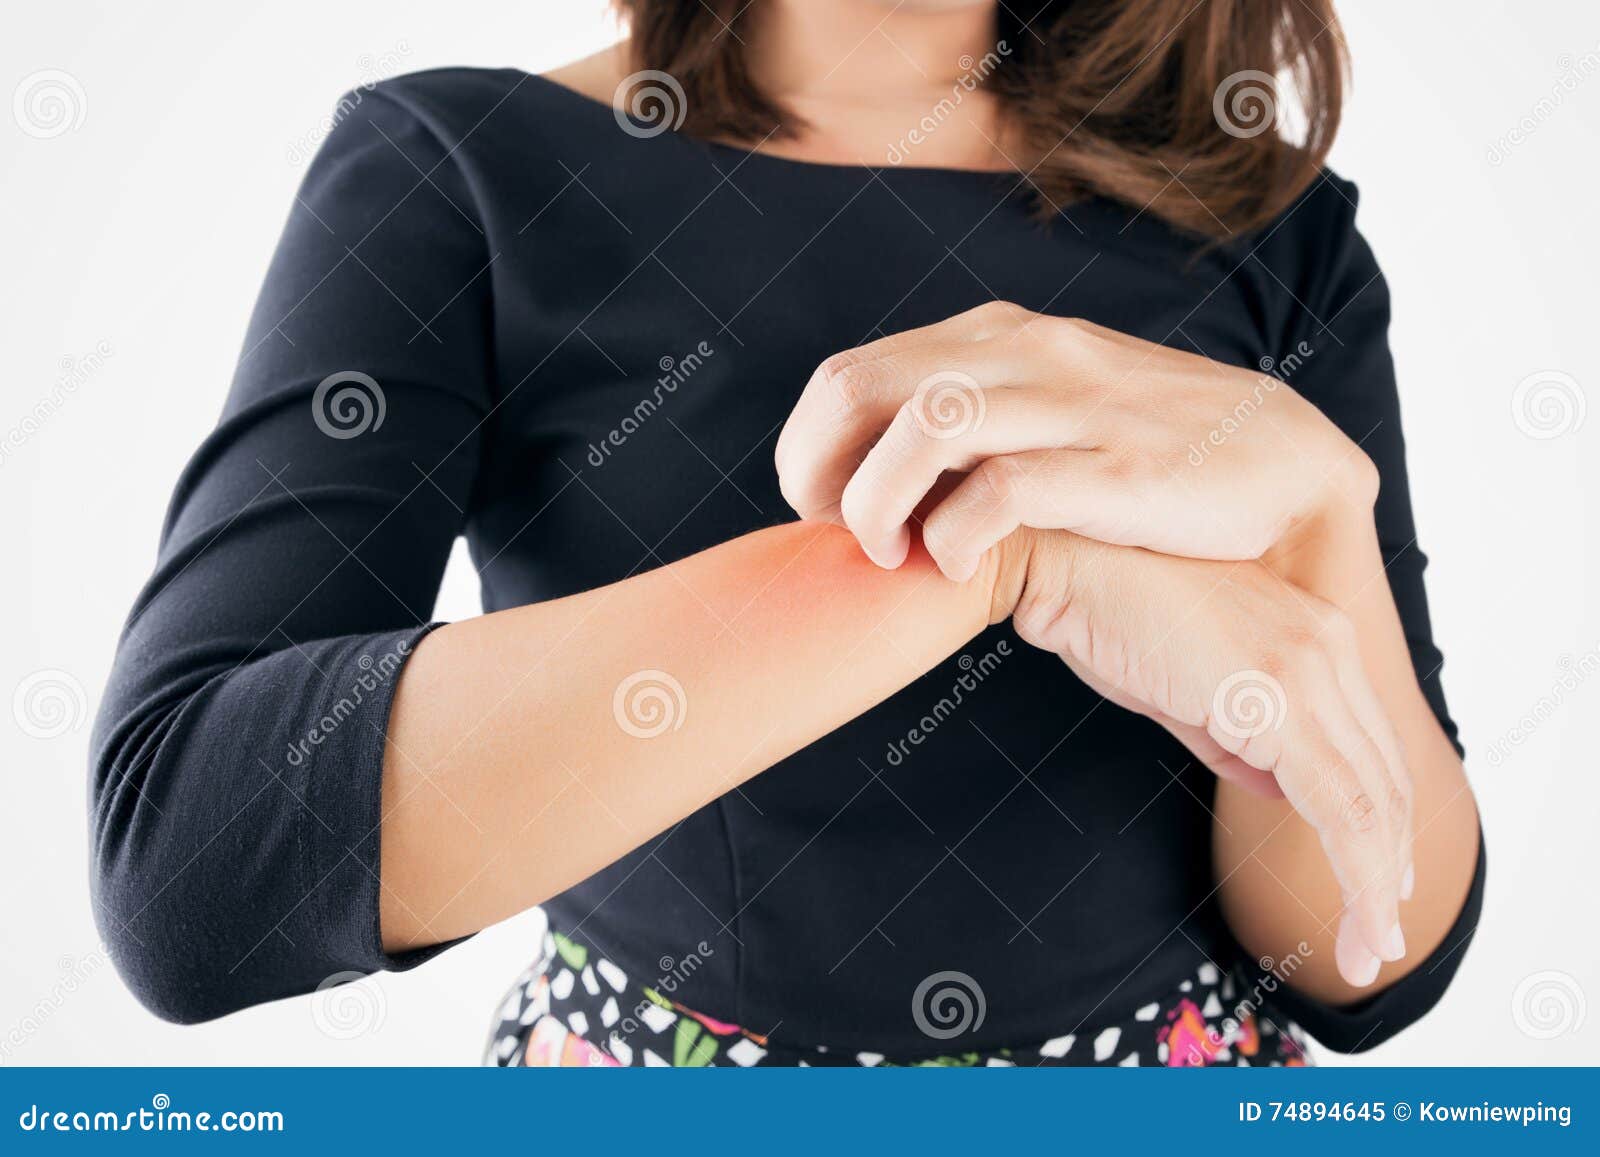 girl scratch the itch with hand. itching, concept with healthcare and medicine.